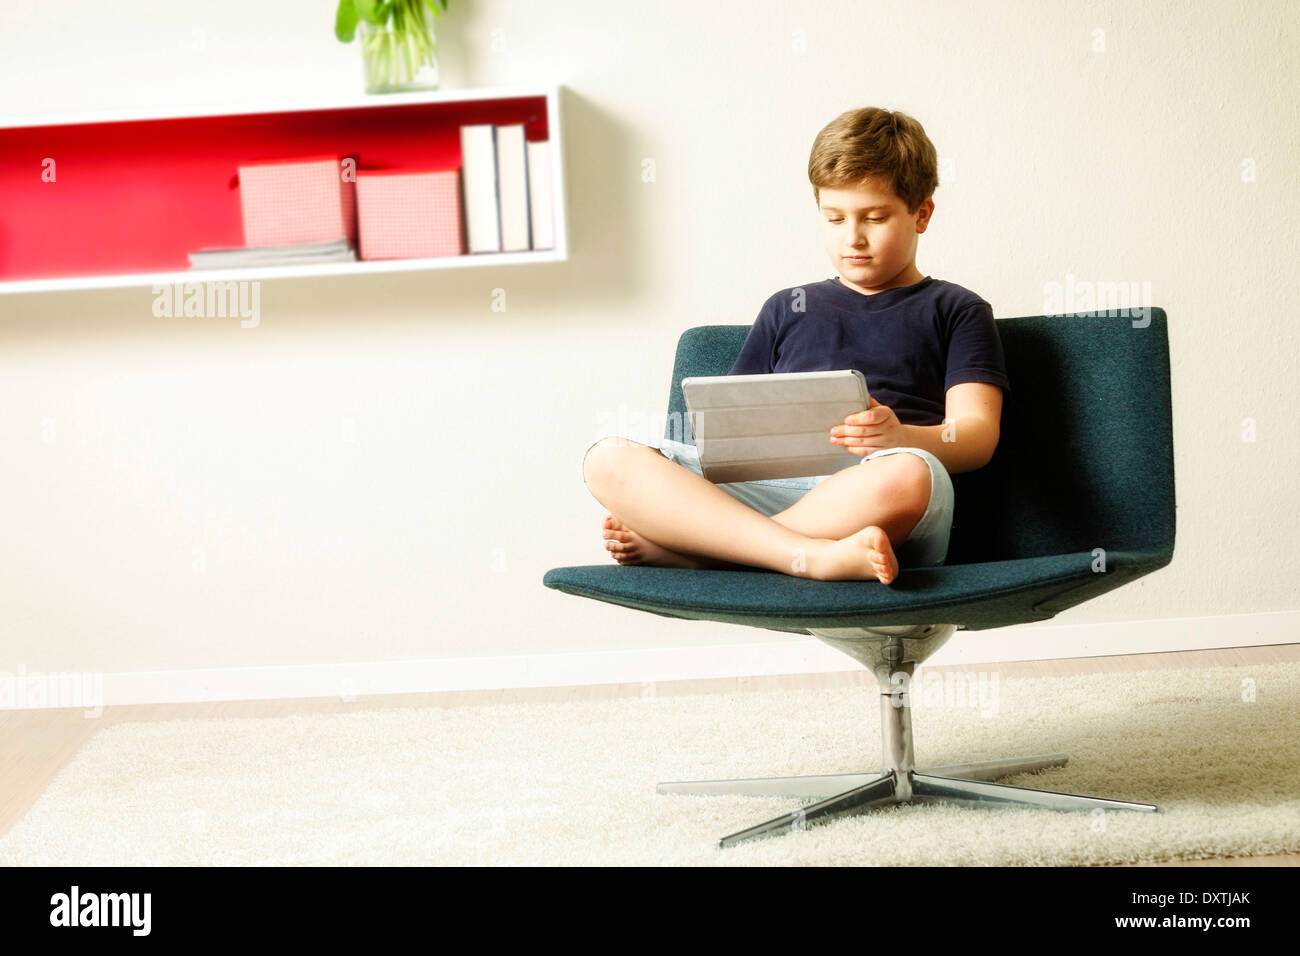 Boy sits in chair using tablet computer, Munich, Bavaria, Germany Stock Photo